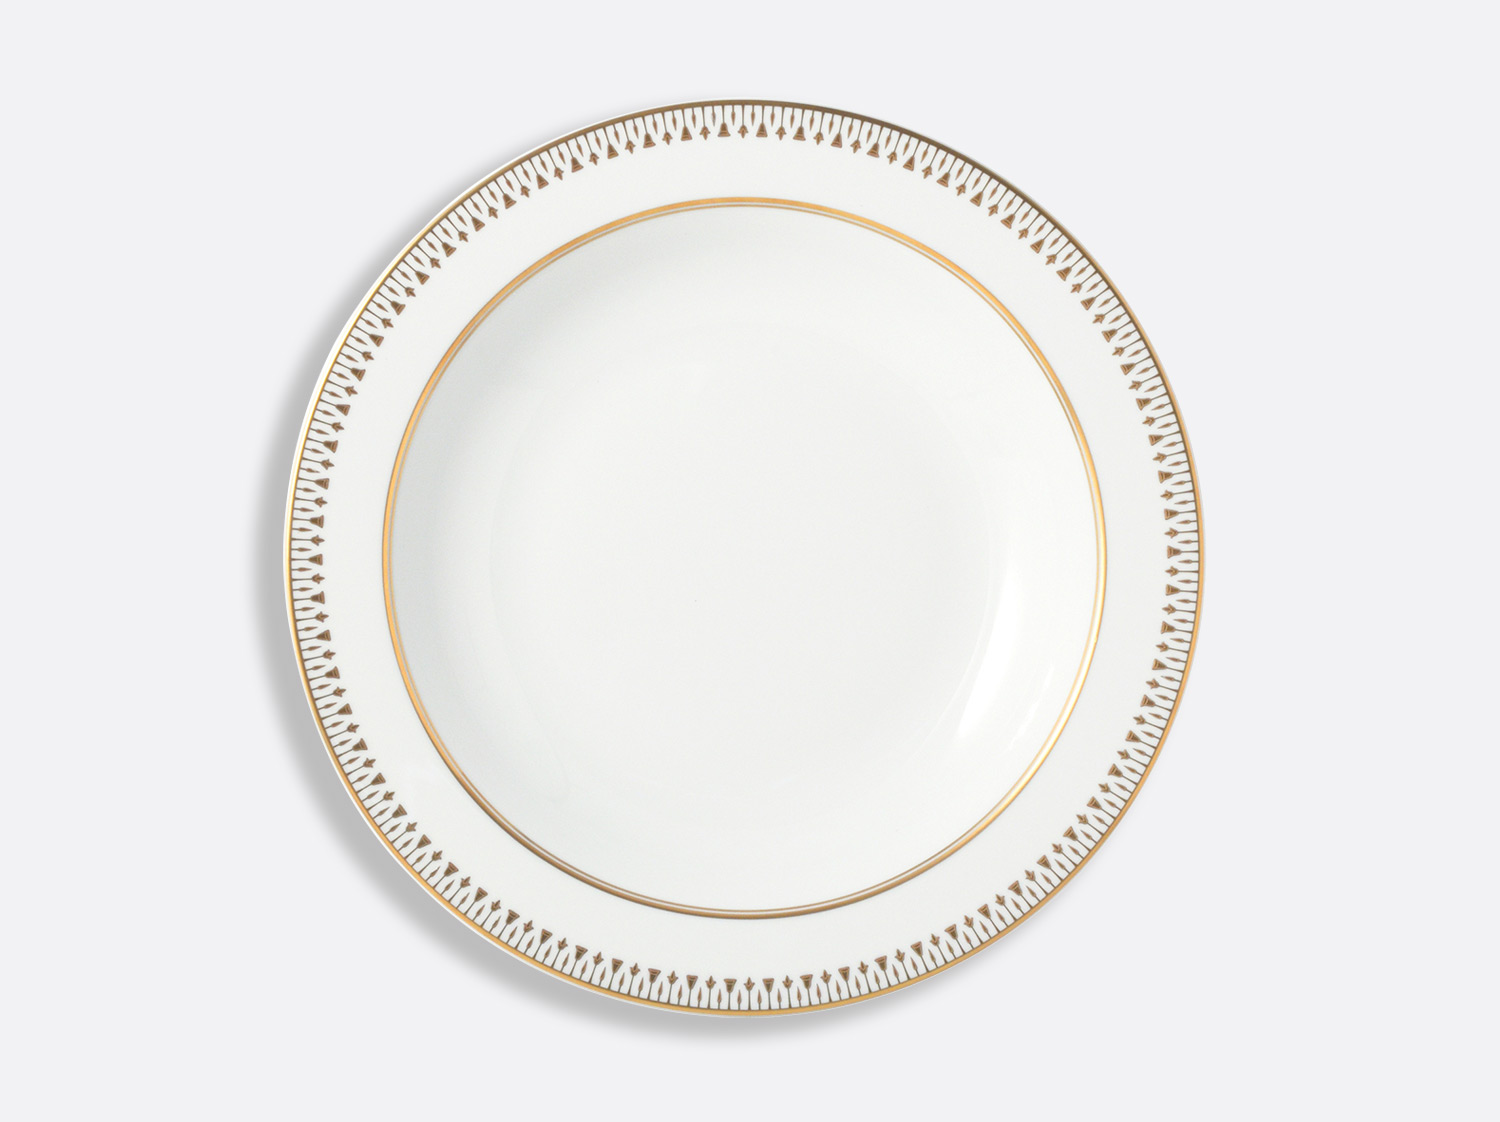 China Deep round dish 11.5" of the collection Soleil levant | Bernardaud